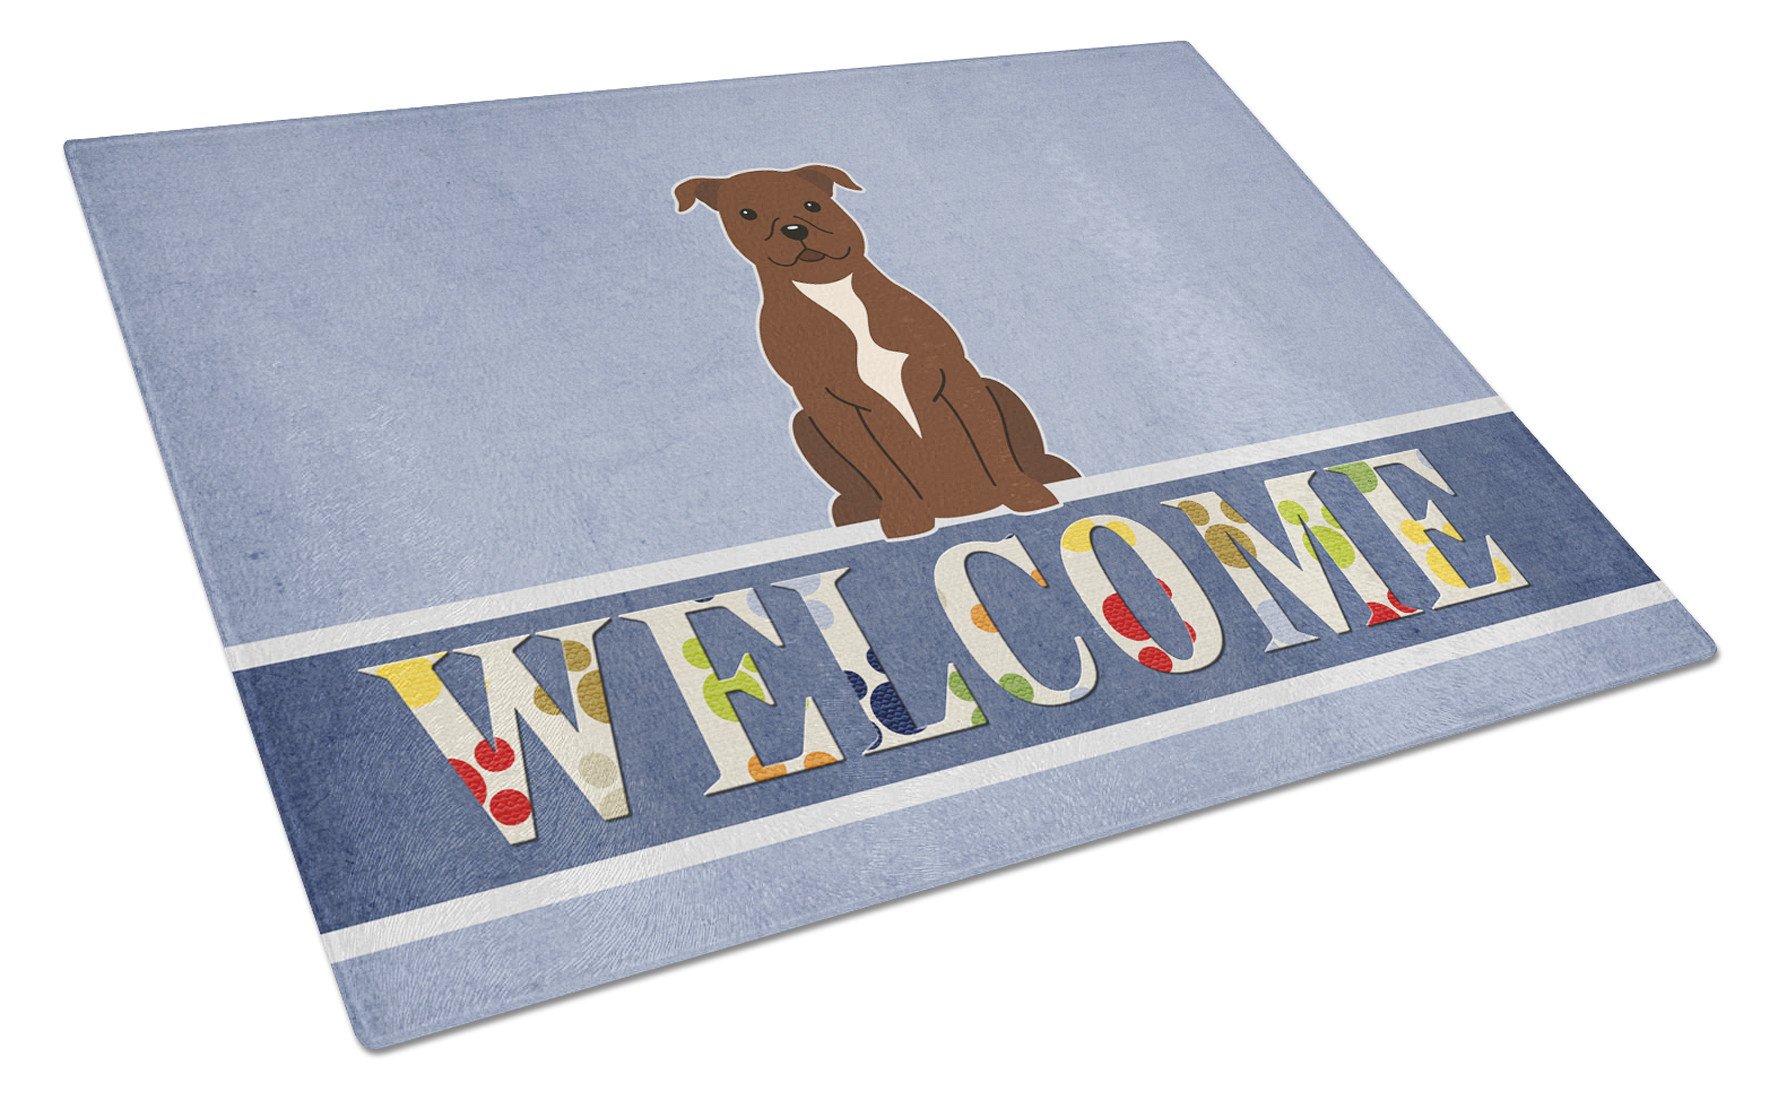 Staffordshire Bull Terrier Chocolate Welcome Glass Cutting Board Large BB5629LCB by Caroline's Treasures